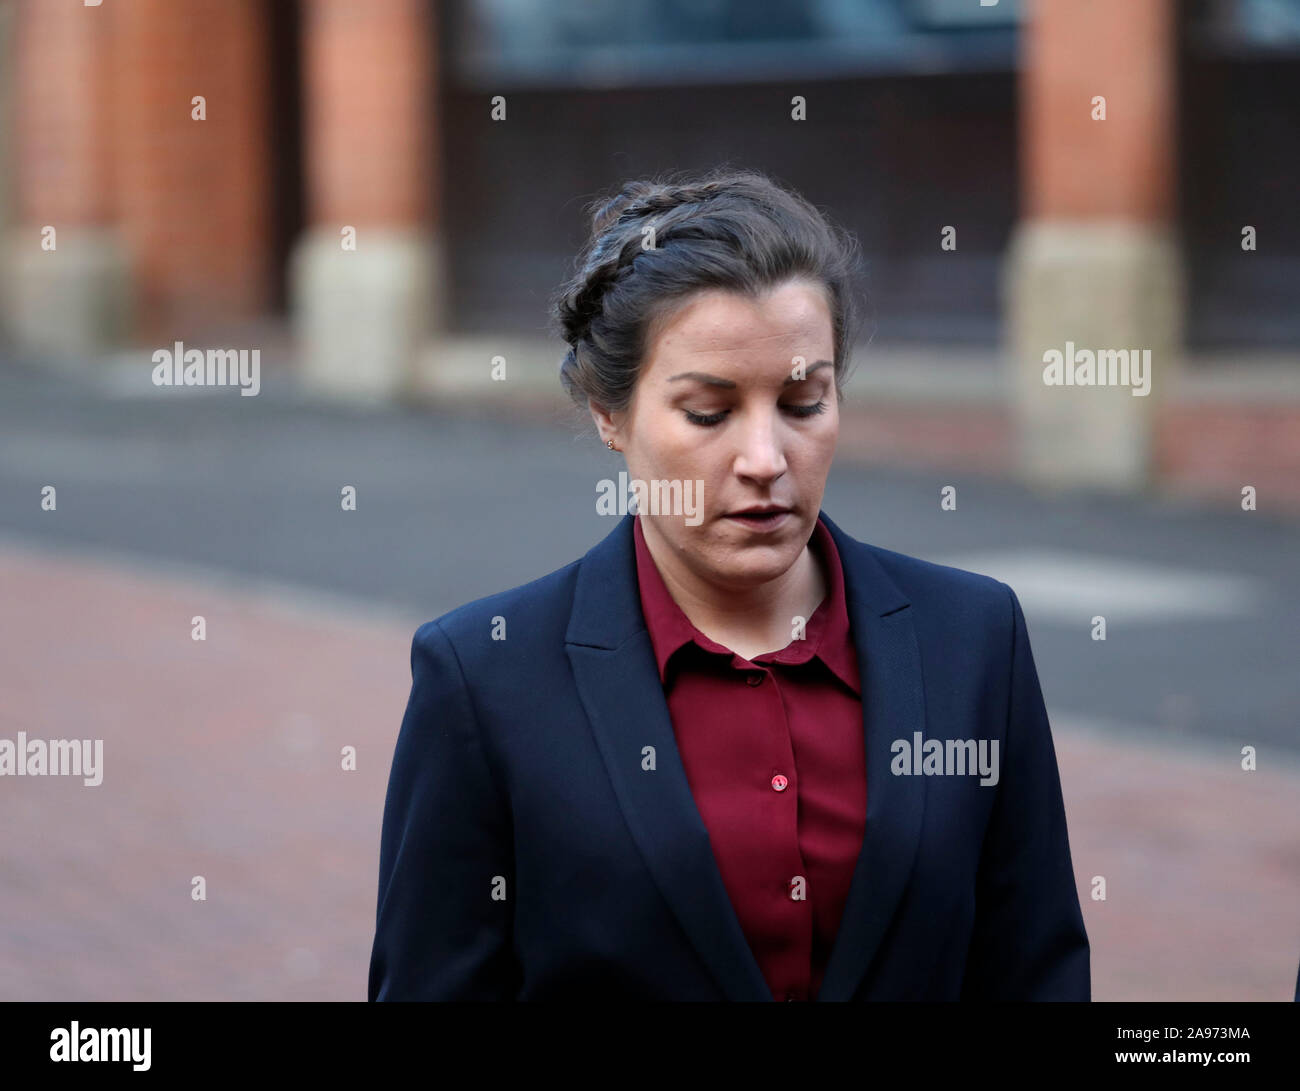 Police constable Mary Ellen Bettley-Smith, who is accused assaulting Dalian  Atkinson on the day he died, arrives at Birmingham Crown Court for a review  hearing. Mr Atkinson, a former Aston Villa footballer,